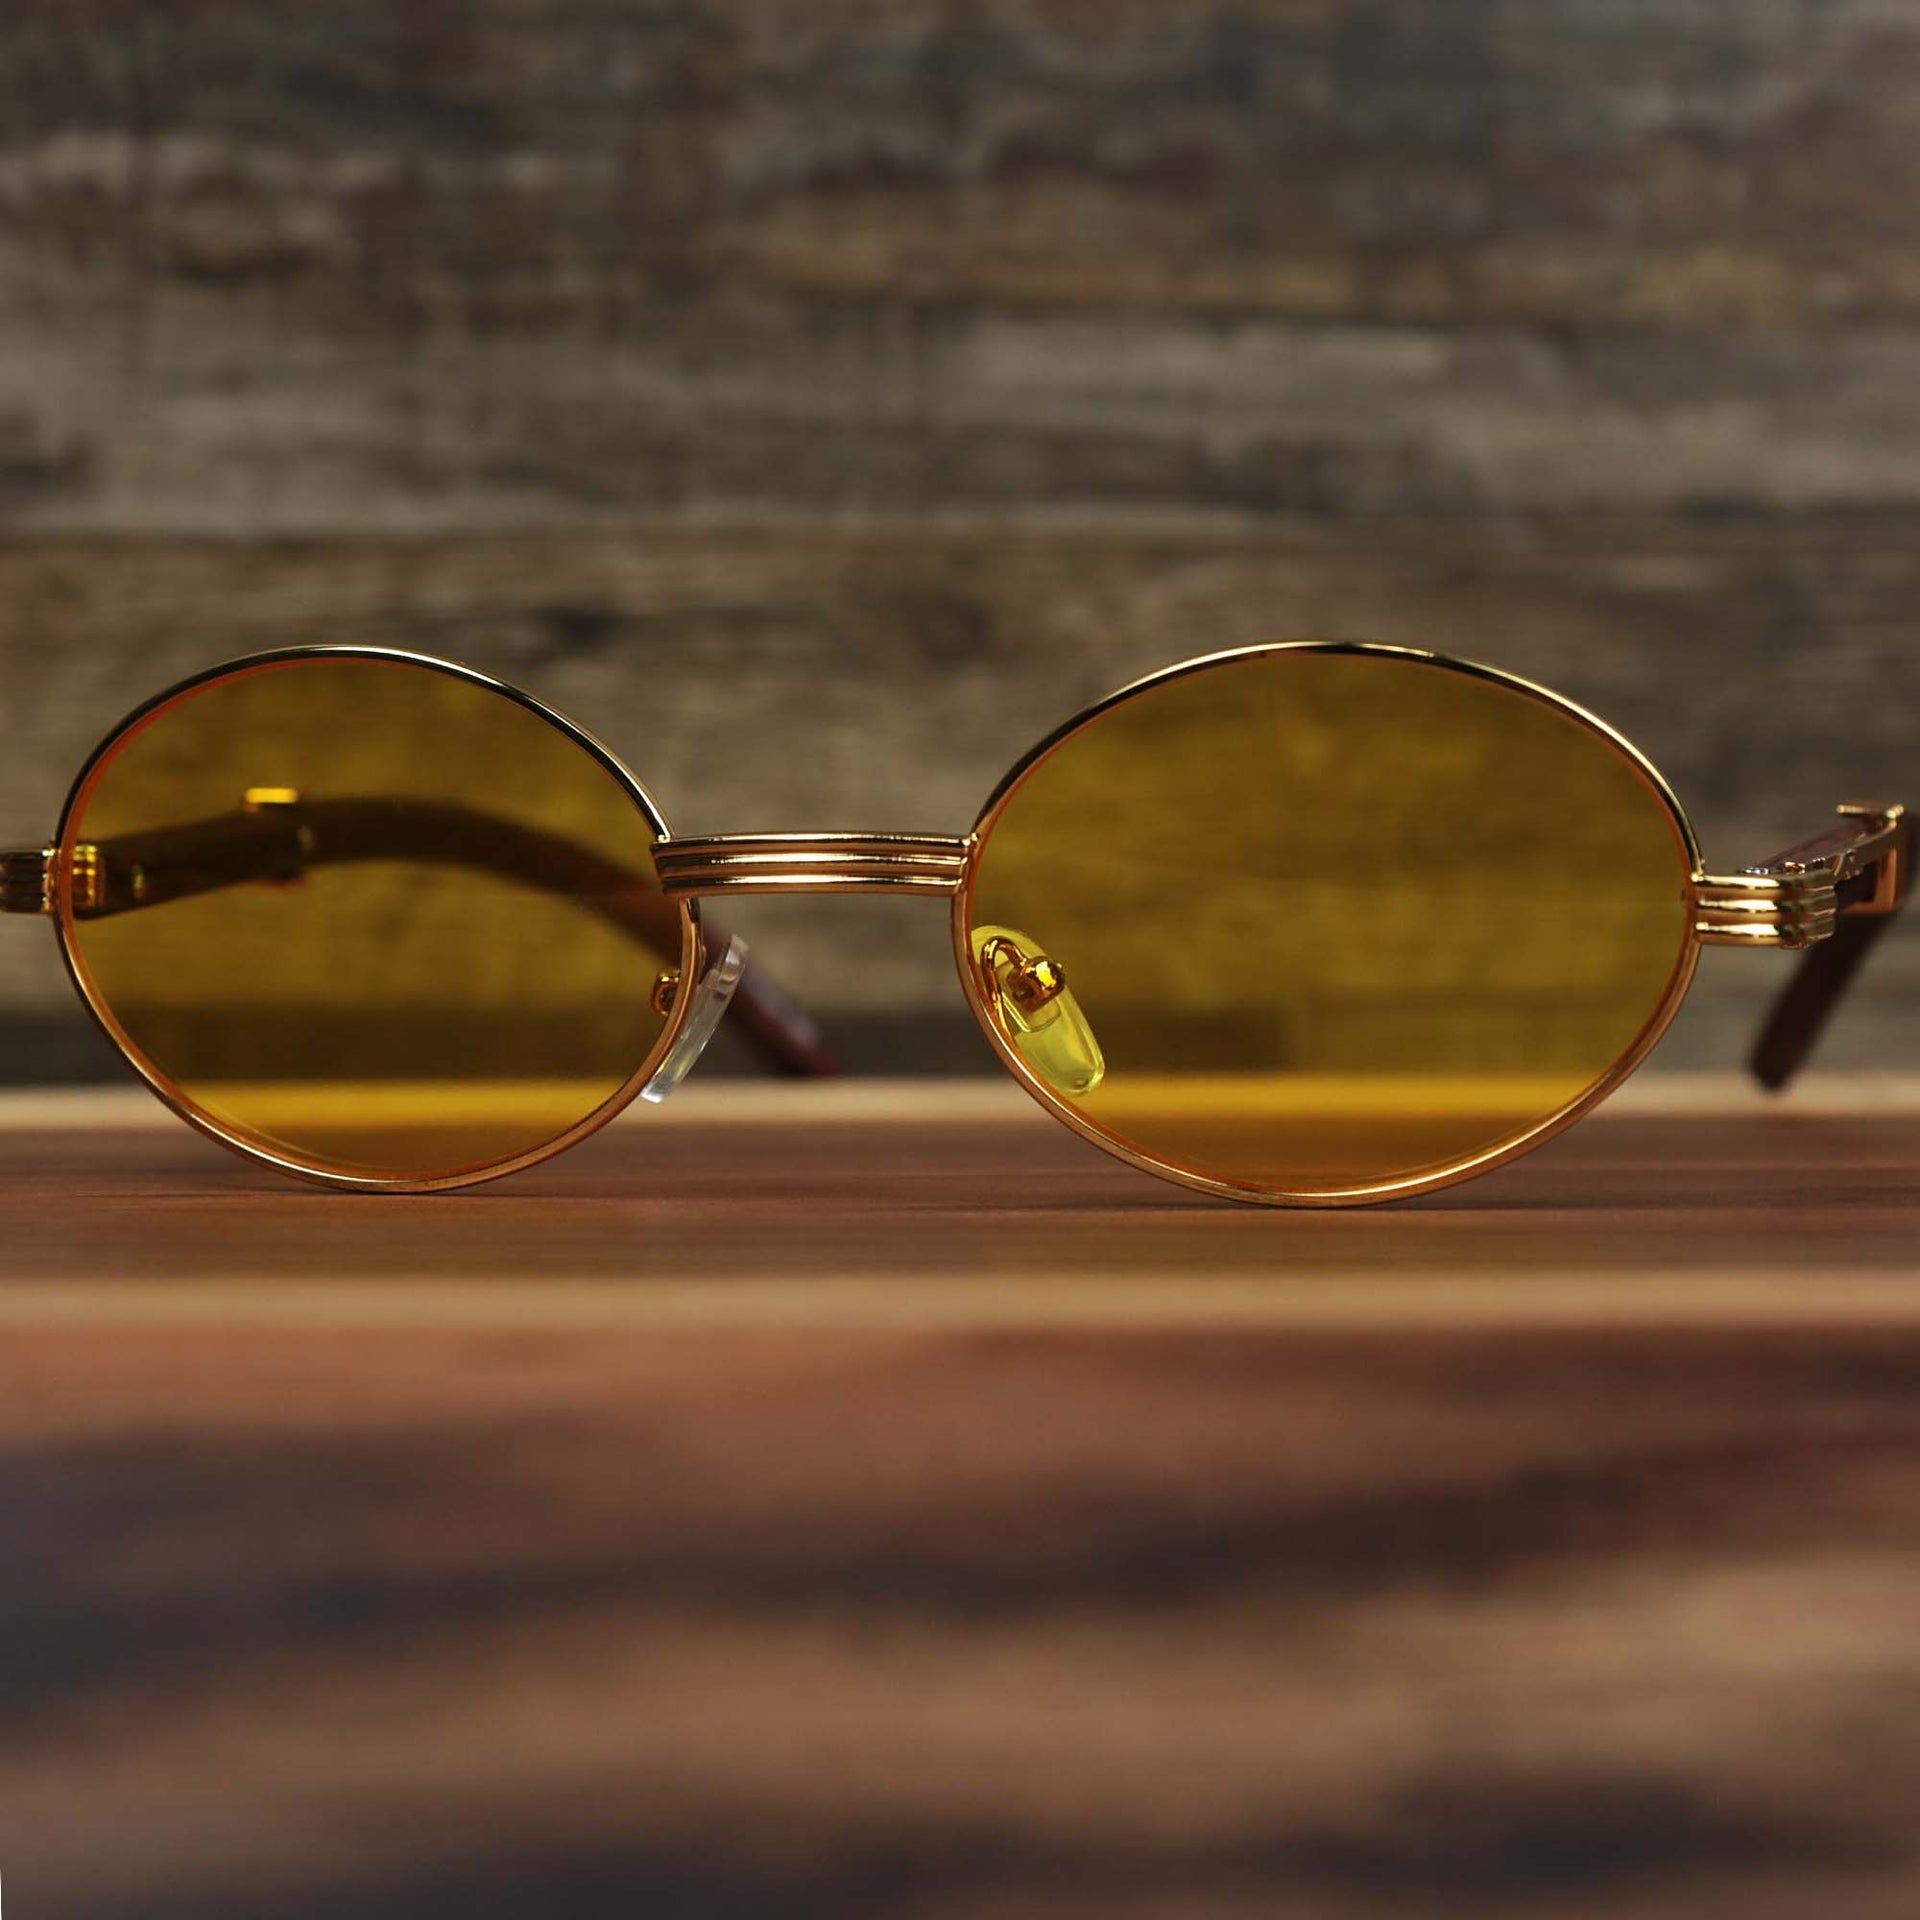 The Oval 3 Row Frame Yellow Lens Sunglasses with Gold Frame